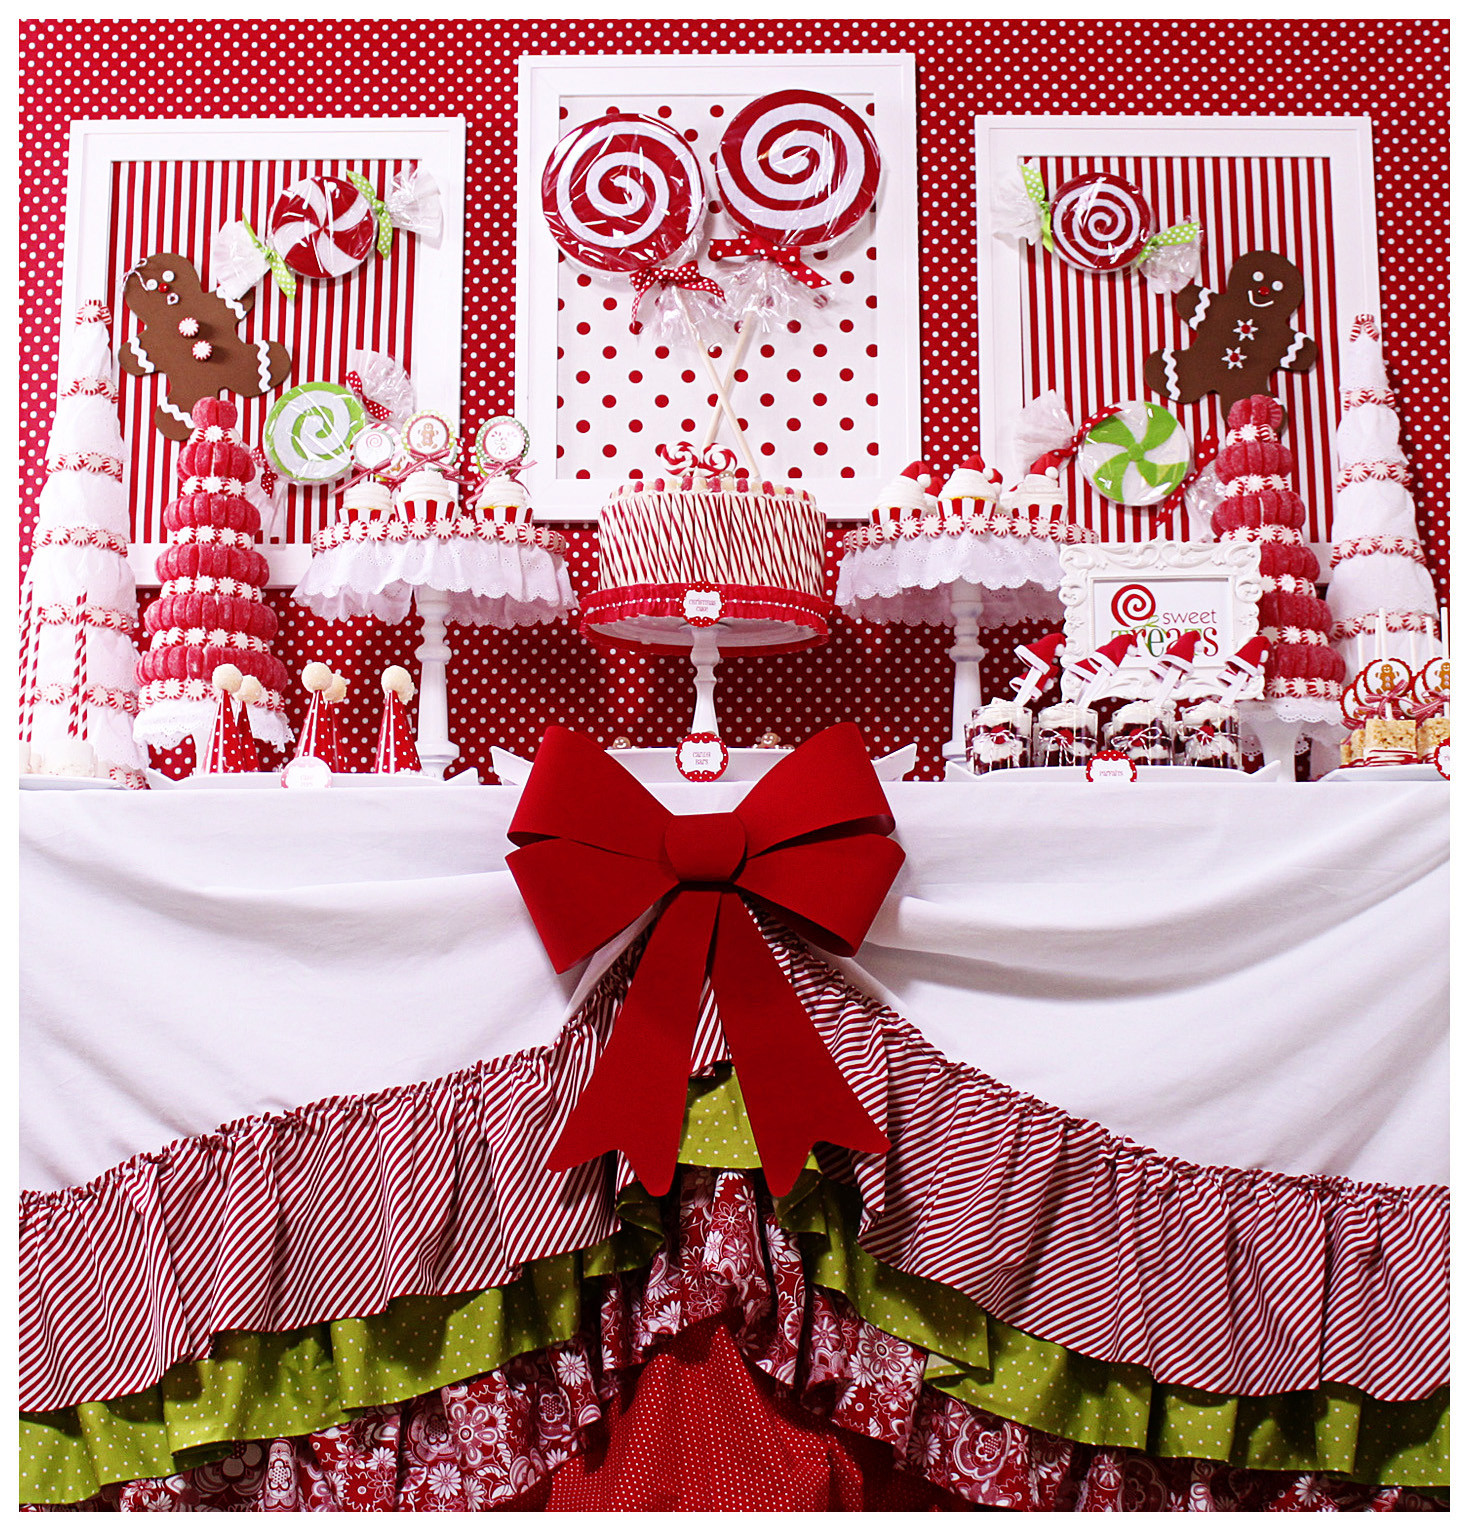 Christmas Themed Desserts
 Amanda s Parties To Go Candy Christmas Dessert Table